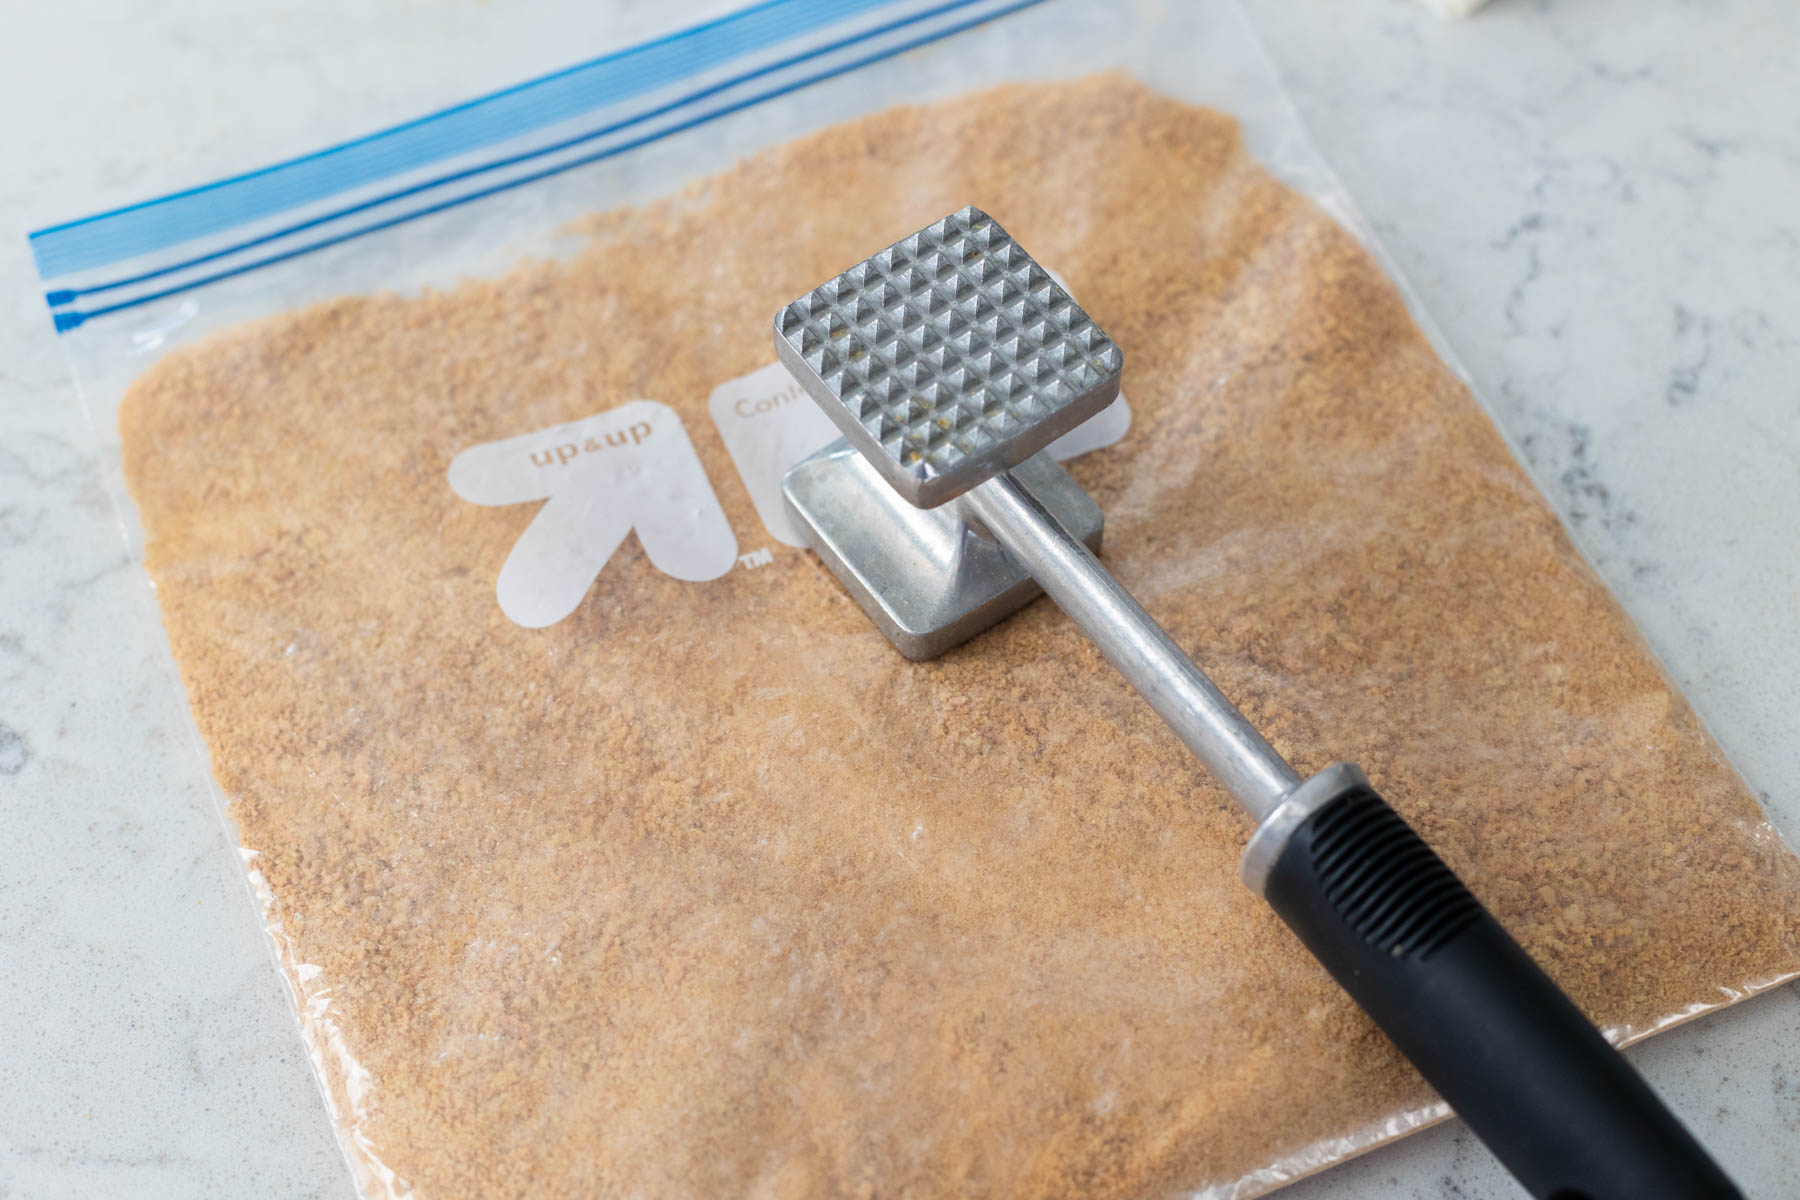 The graham crackers have been crushed in a plastic bag with a kitchen mallet.